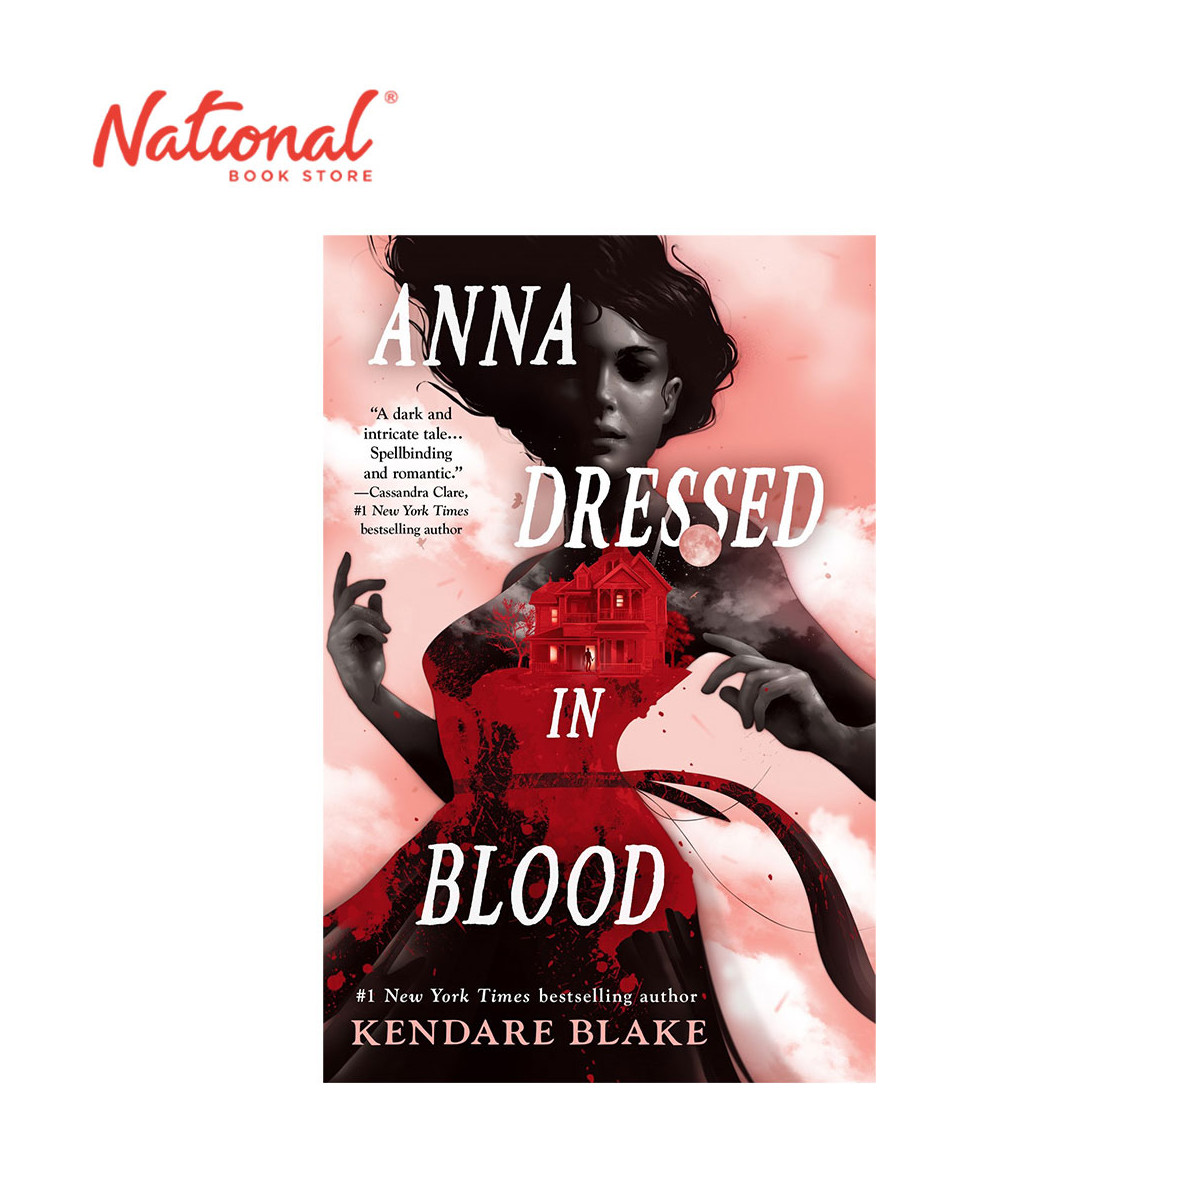 Anna Dressed In Blood by Kendare Blake - Trade Paperback - Teens Fiction